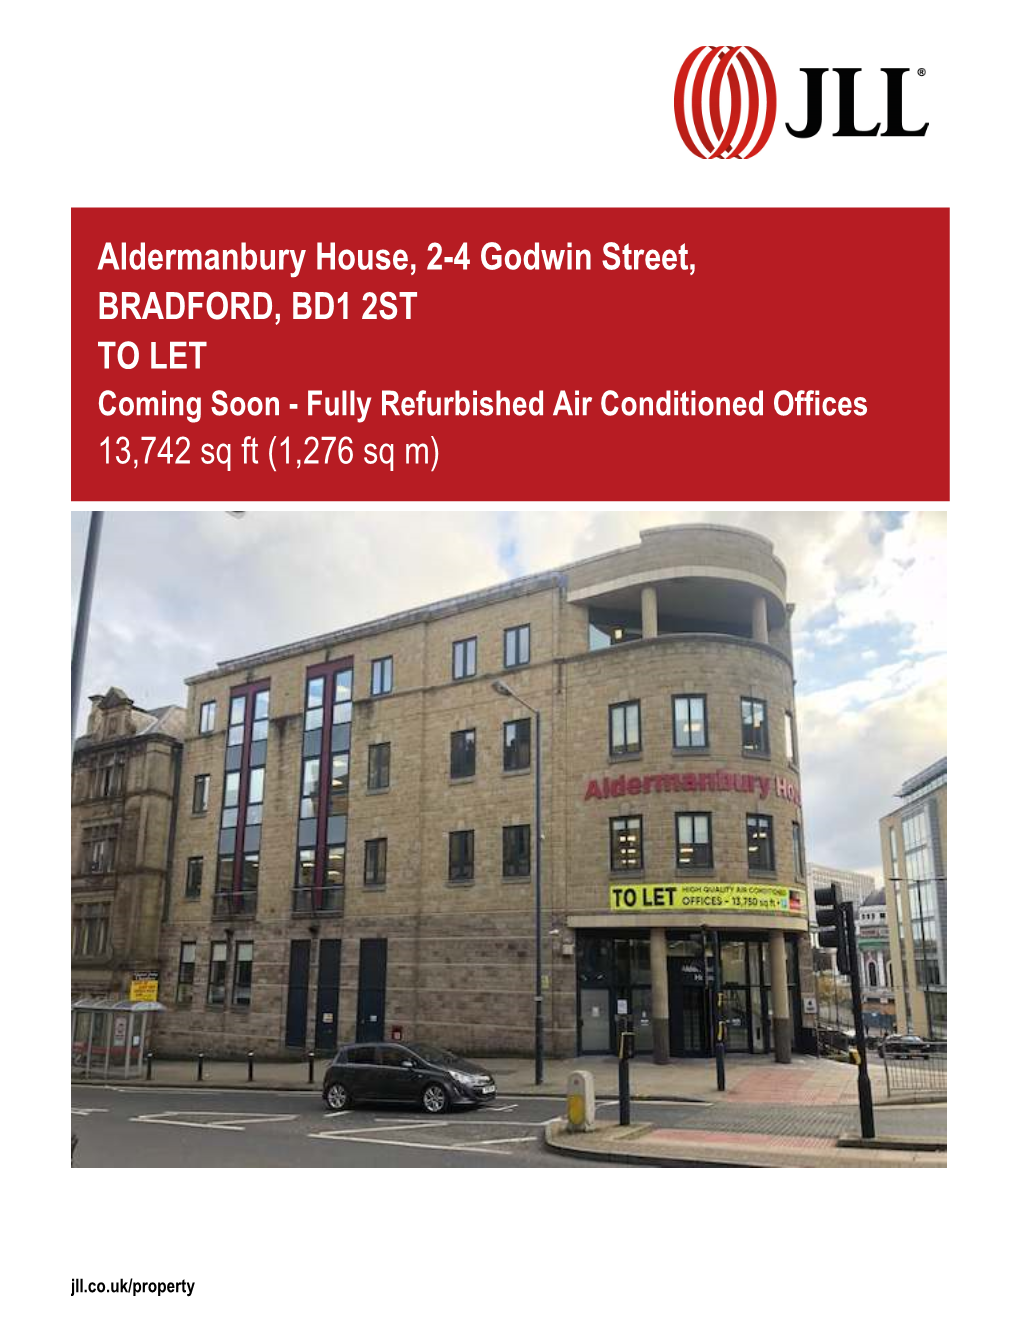 Aldermanbury House, 2-4 Godwin Street, BRADFORD, BD1 2ST to LET Coming Soon - Fully Refurbished Air Conditioned Offices 13,742 Sq Ft (1,276 Sq M)